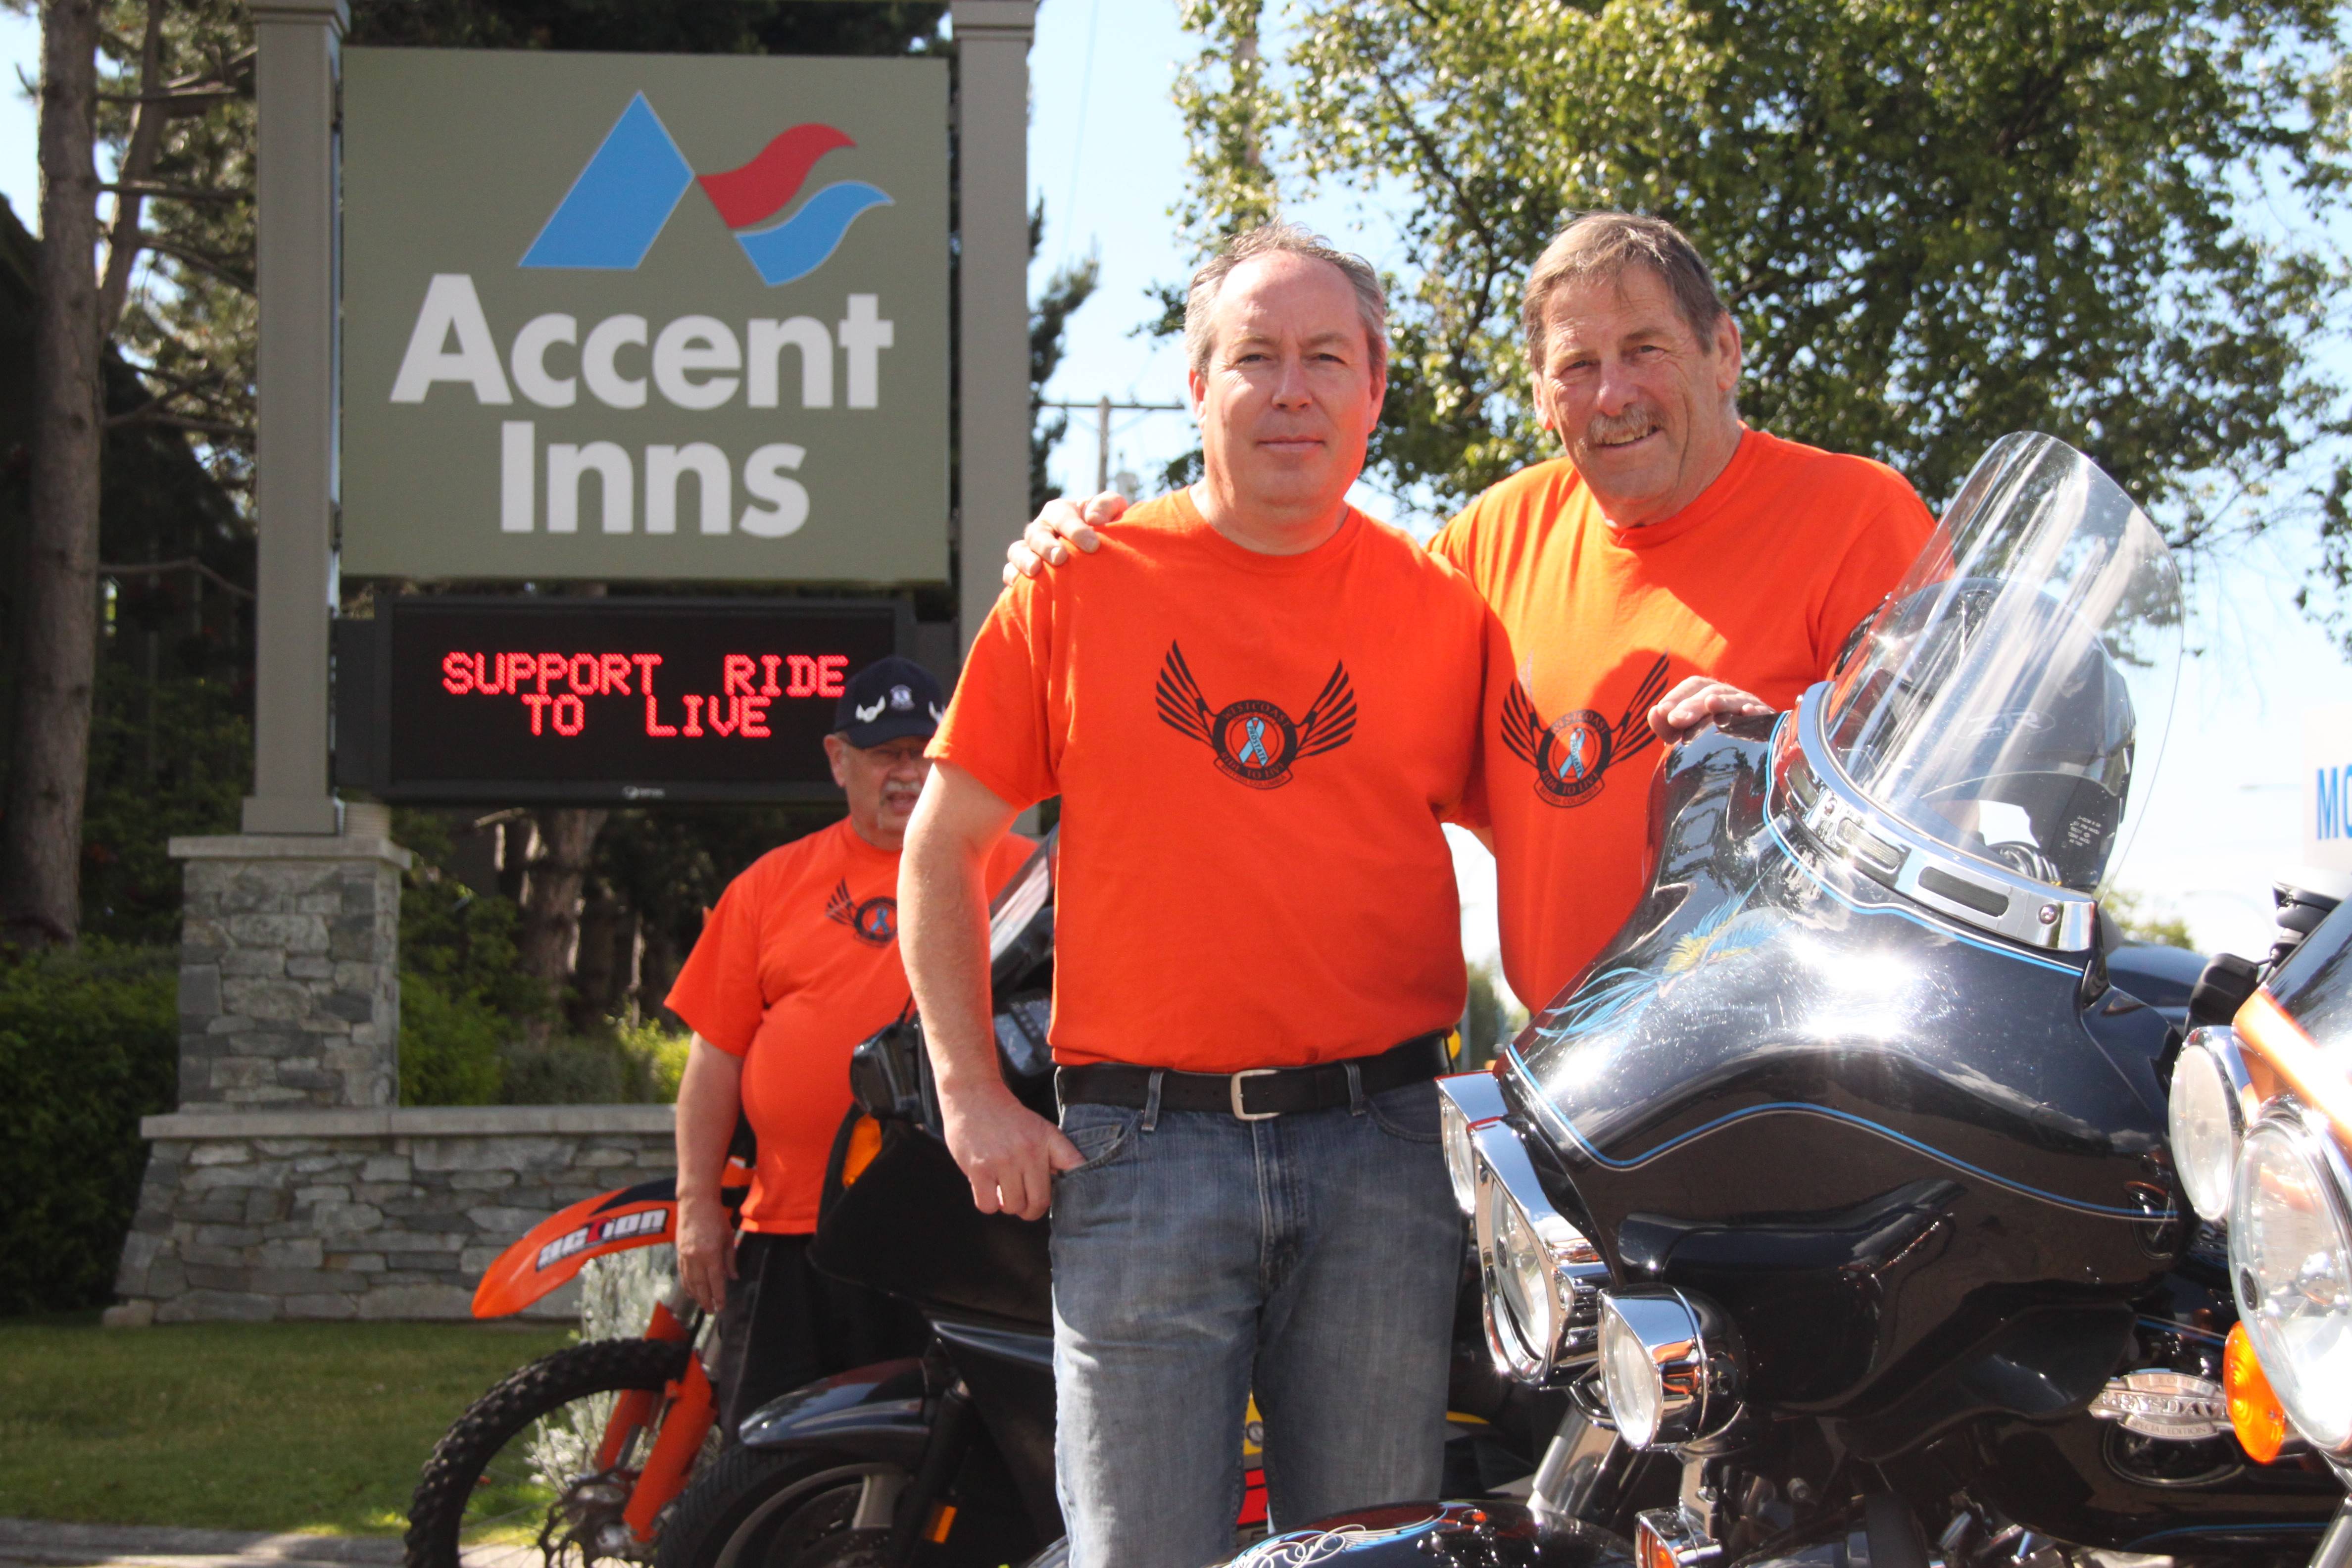 Bill and Dave from Westcoast Ride to Livehelping to launch Accent Inns motorcycle friendly hotel program